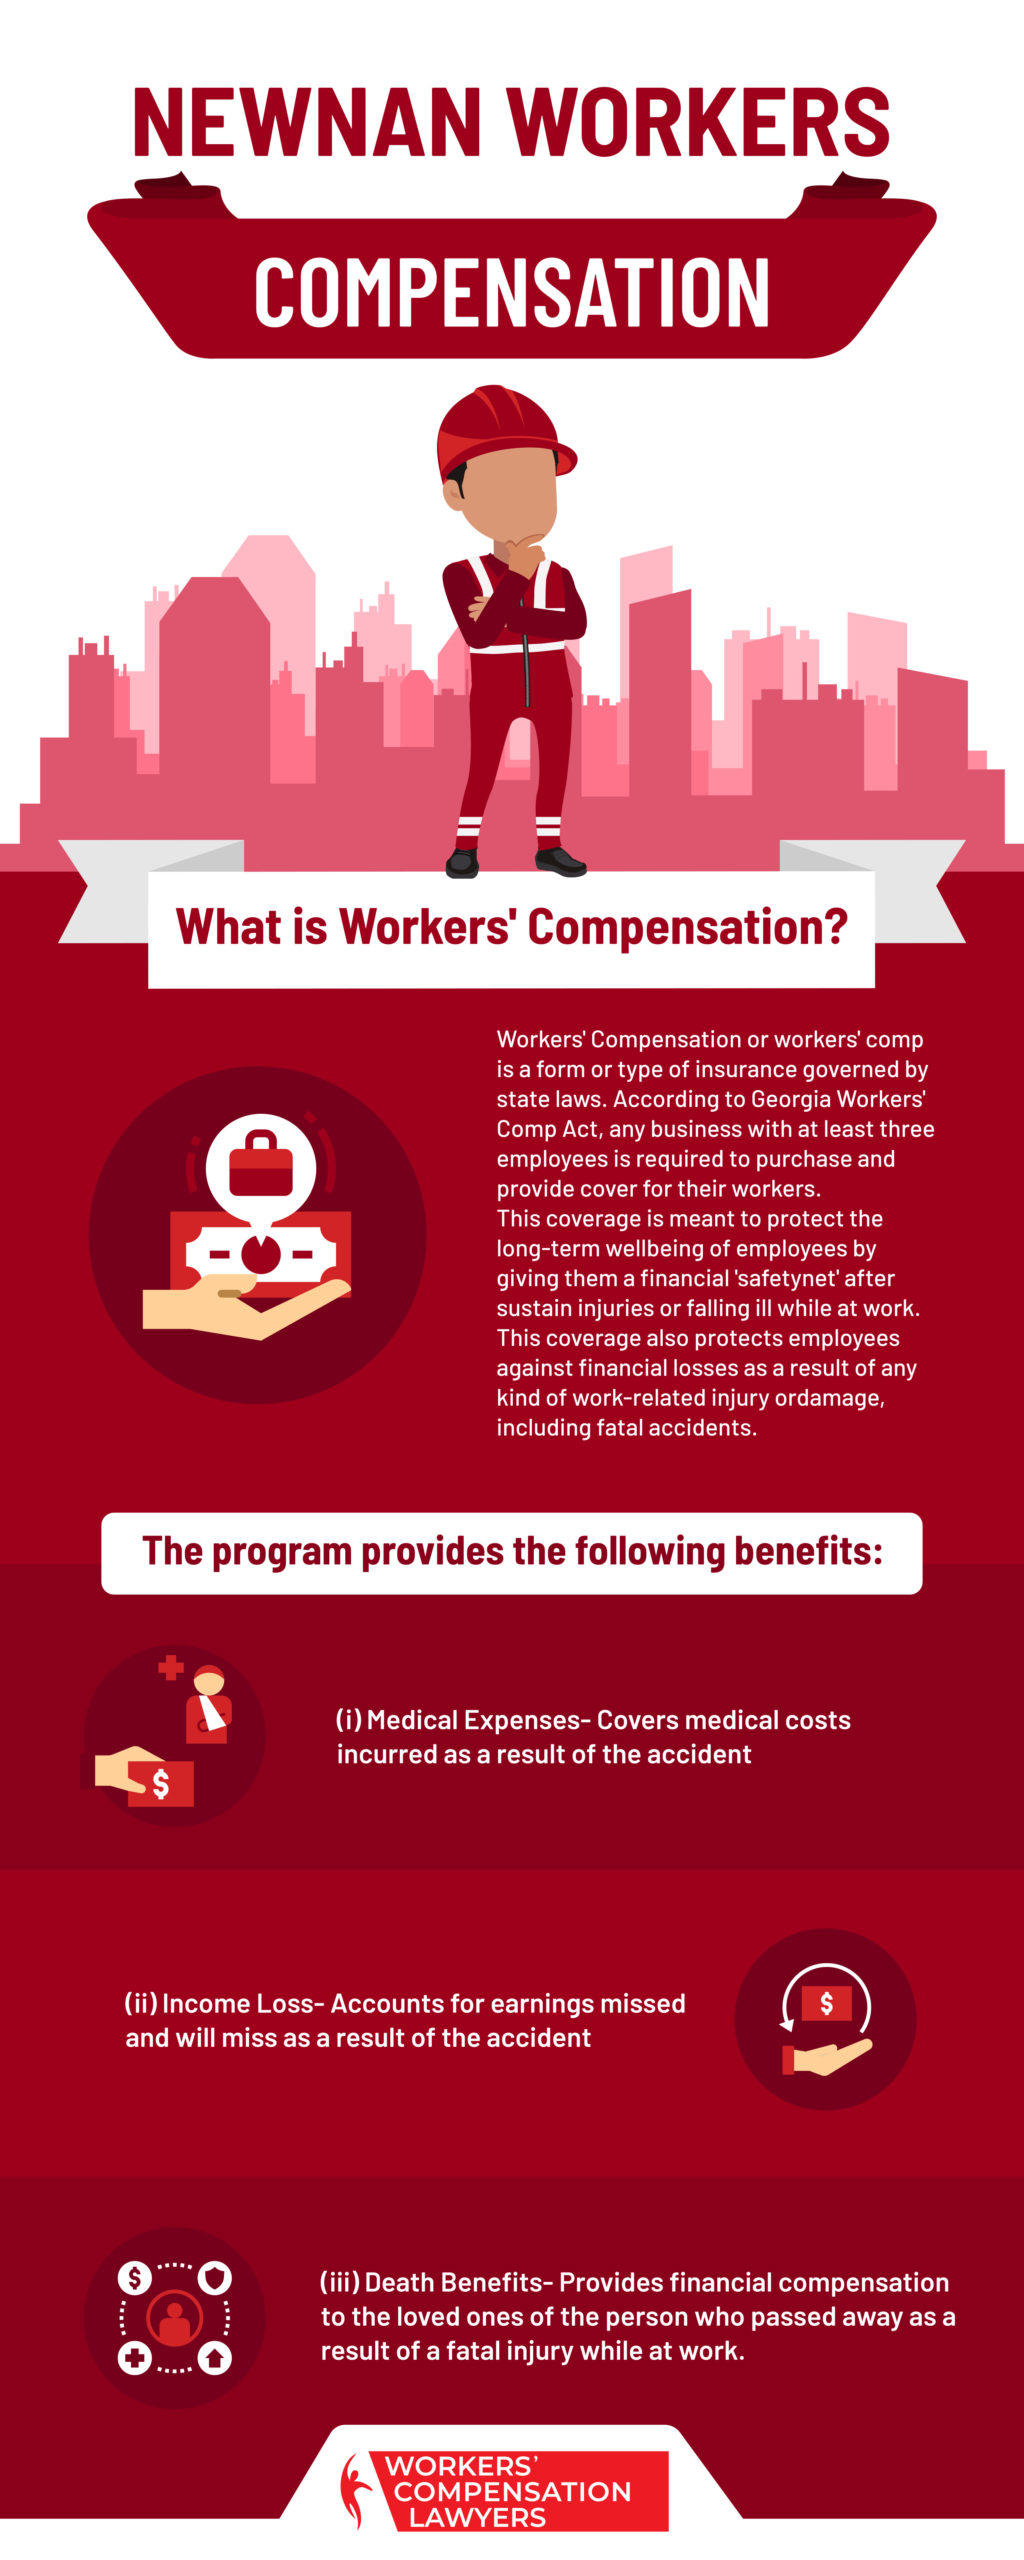 Newnan Workers Compensation Infographic